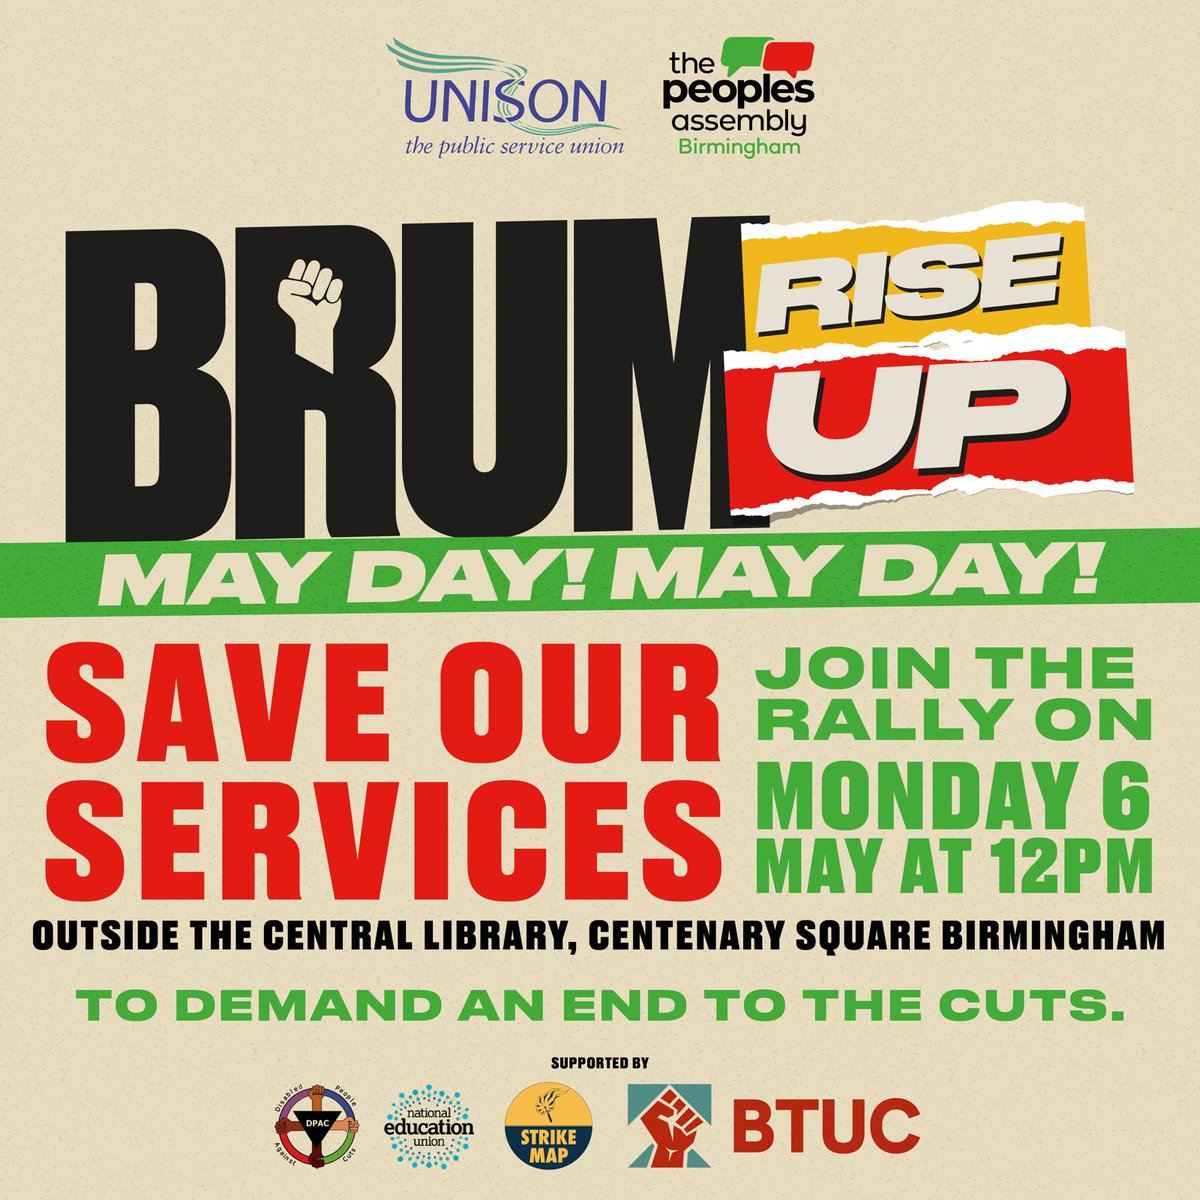 We will be launching Birmingham Loves Libraries at the Save Our Services rally on Monday 6 May at 12pm. See you there!